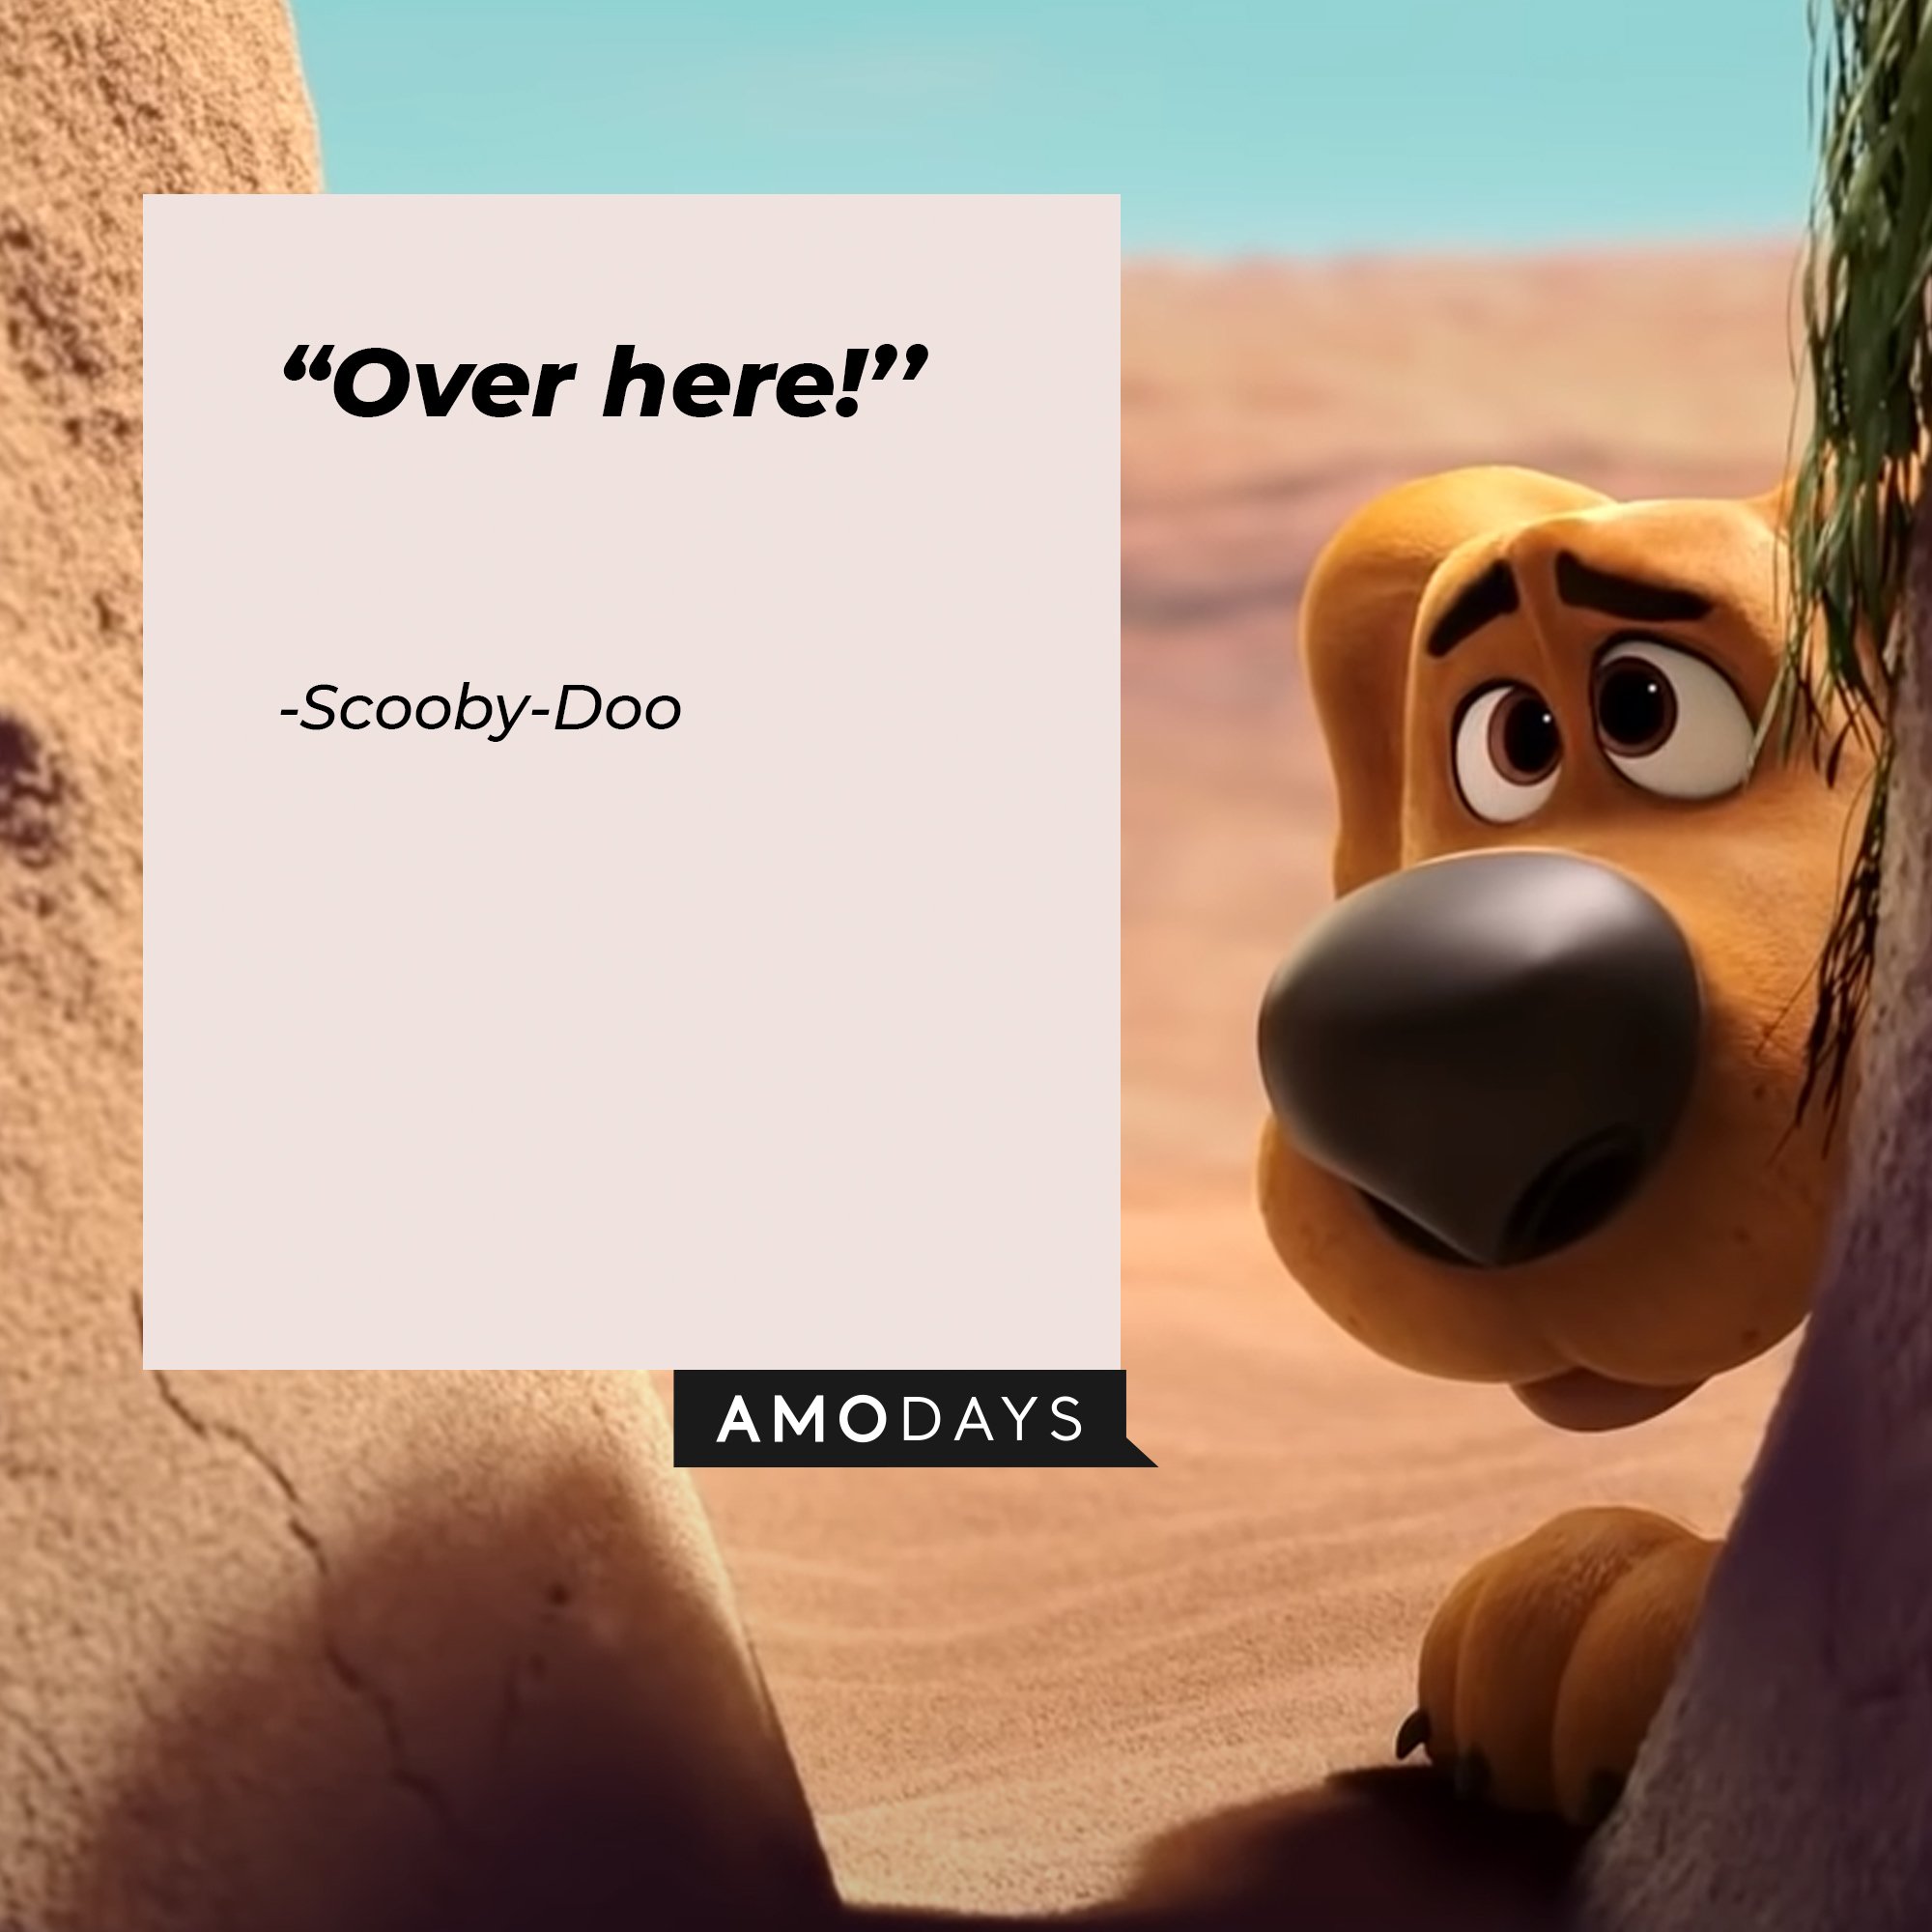 Scooby-Doo: “Over here!” | Image: AmoDays